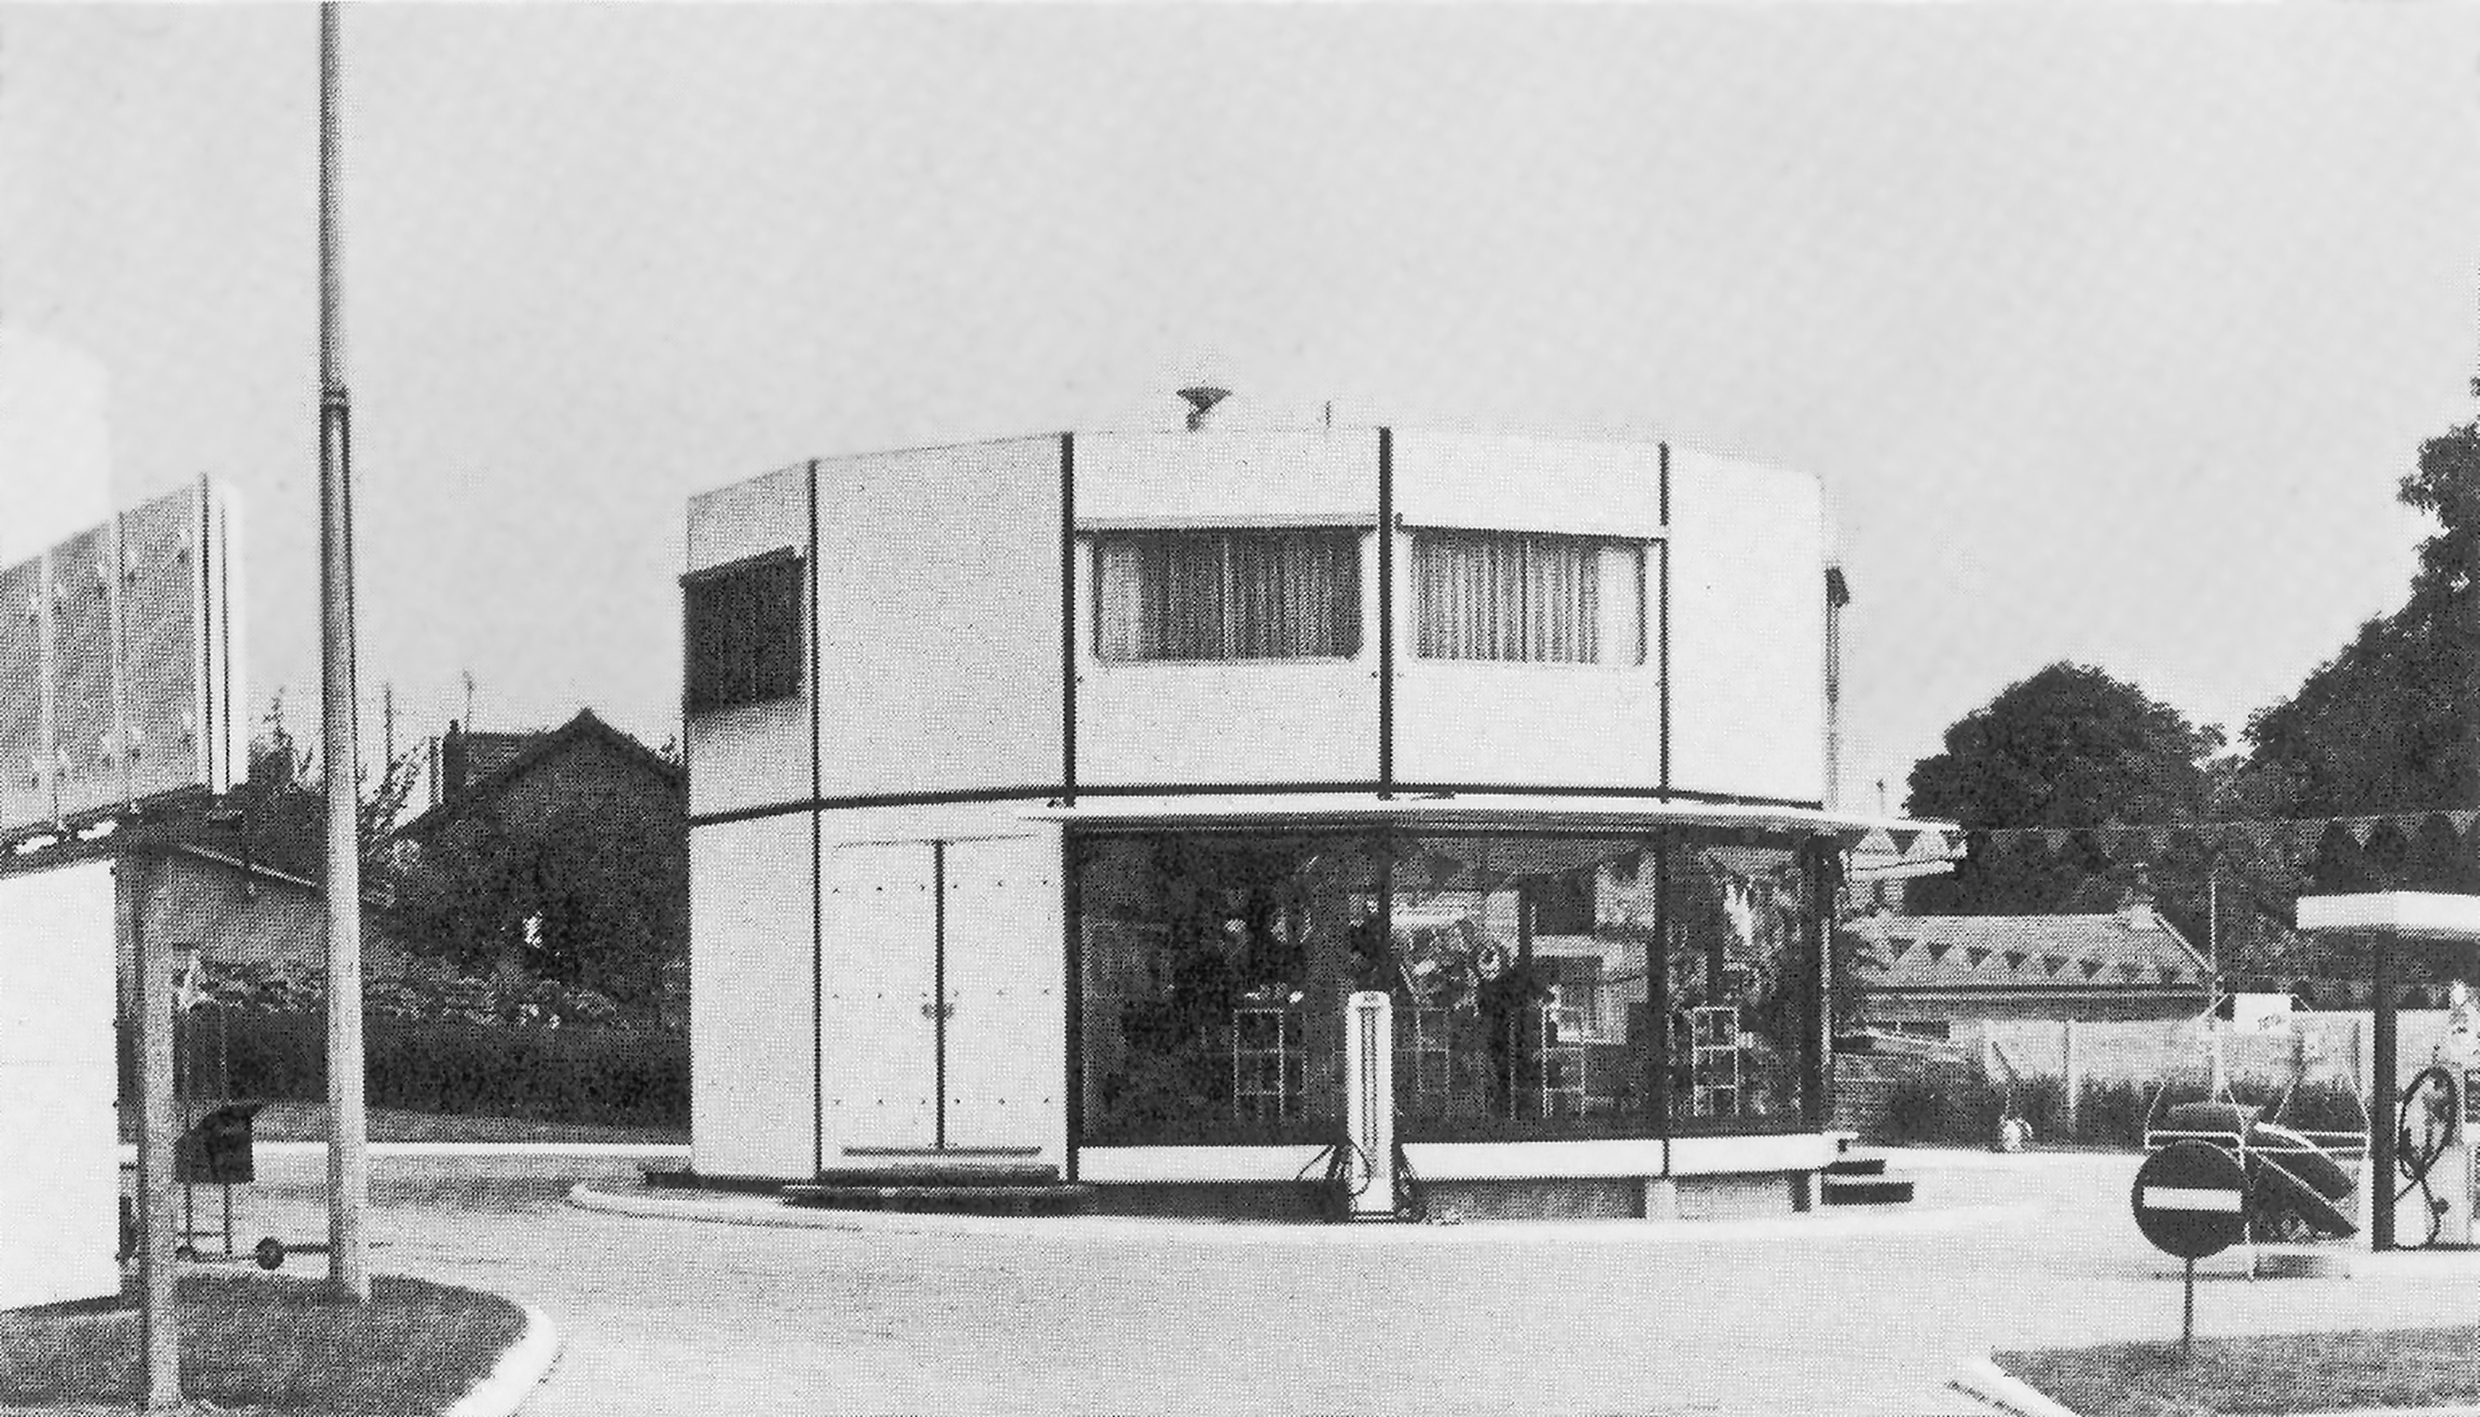 Total filling station, locality unknown, 1969.